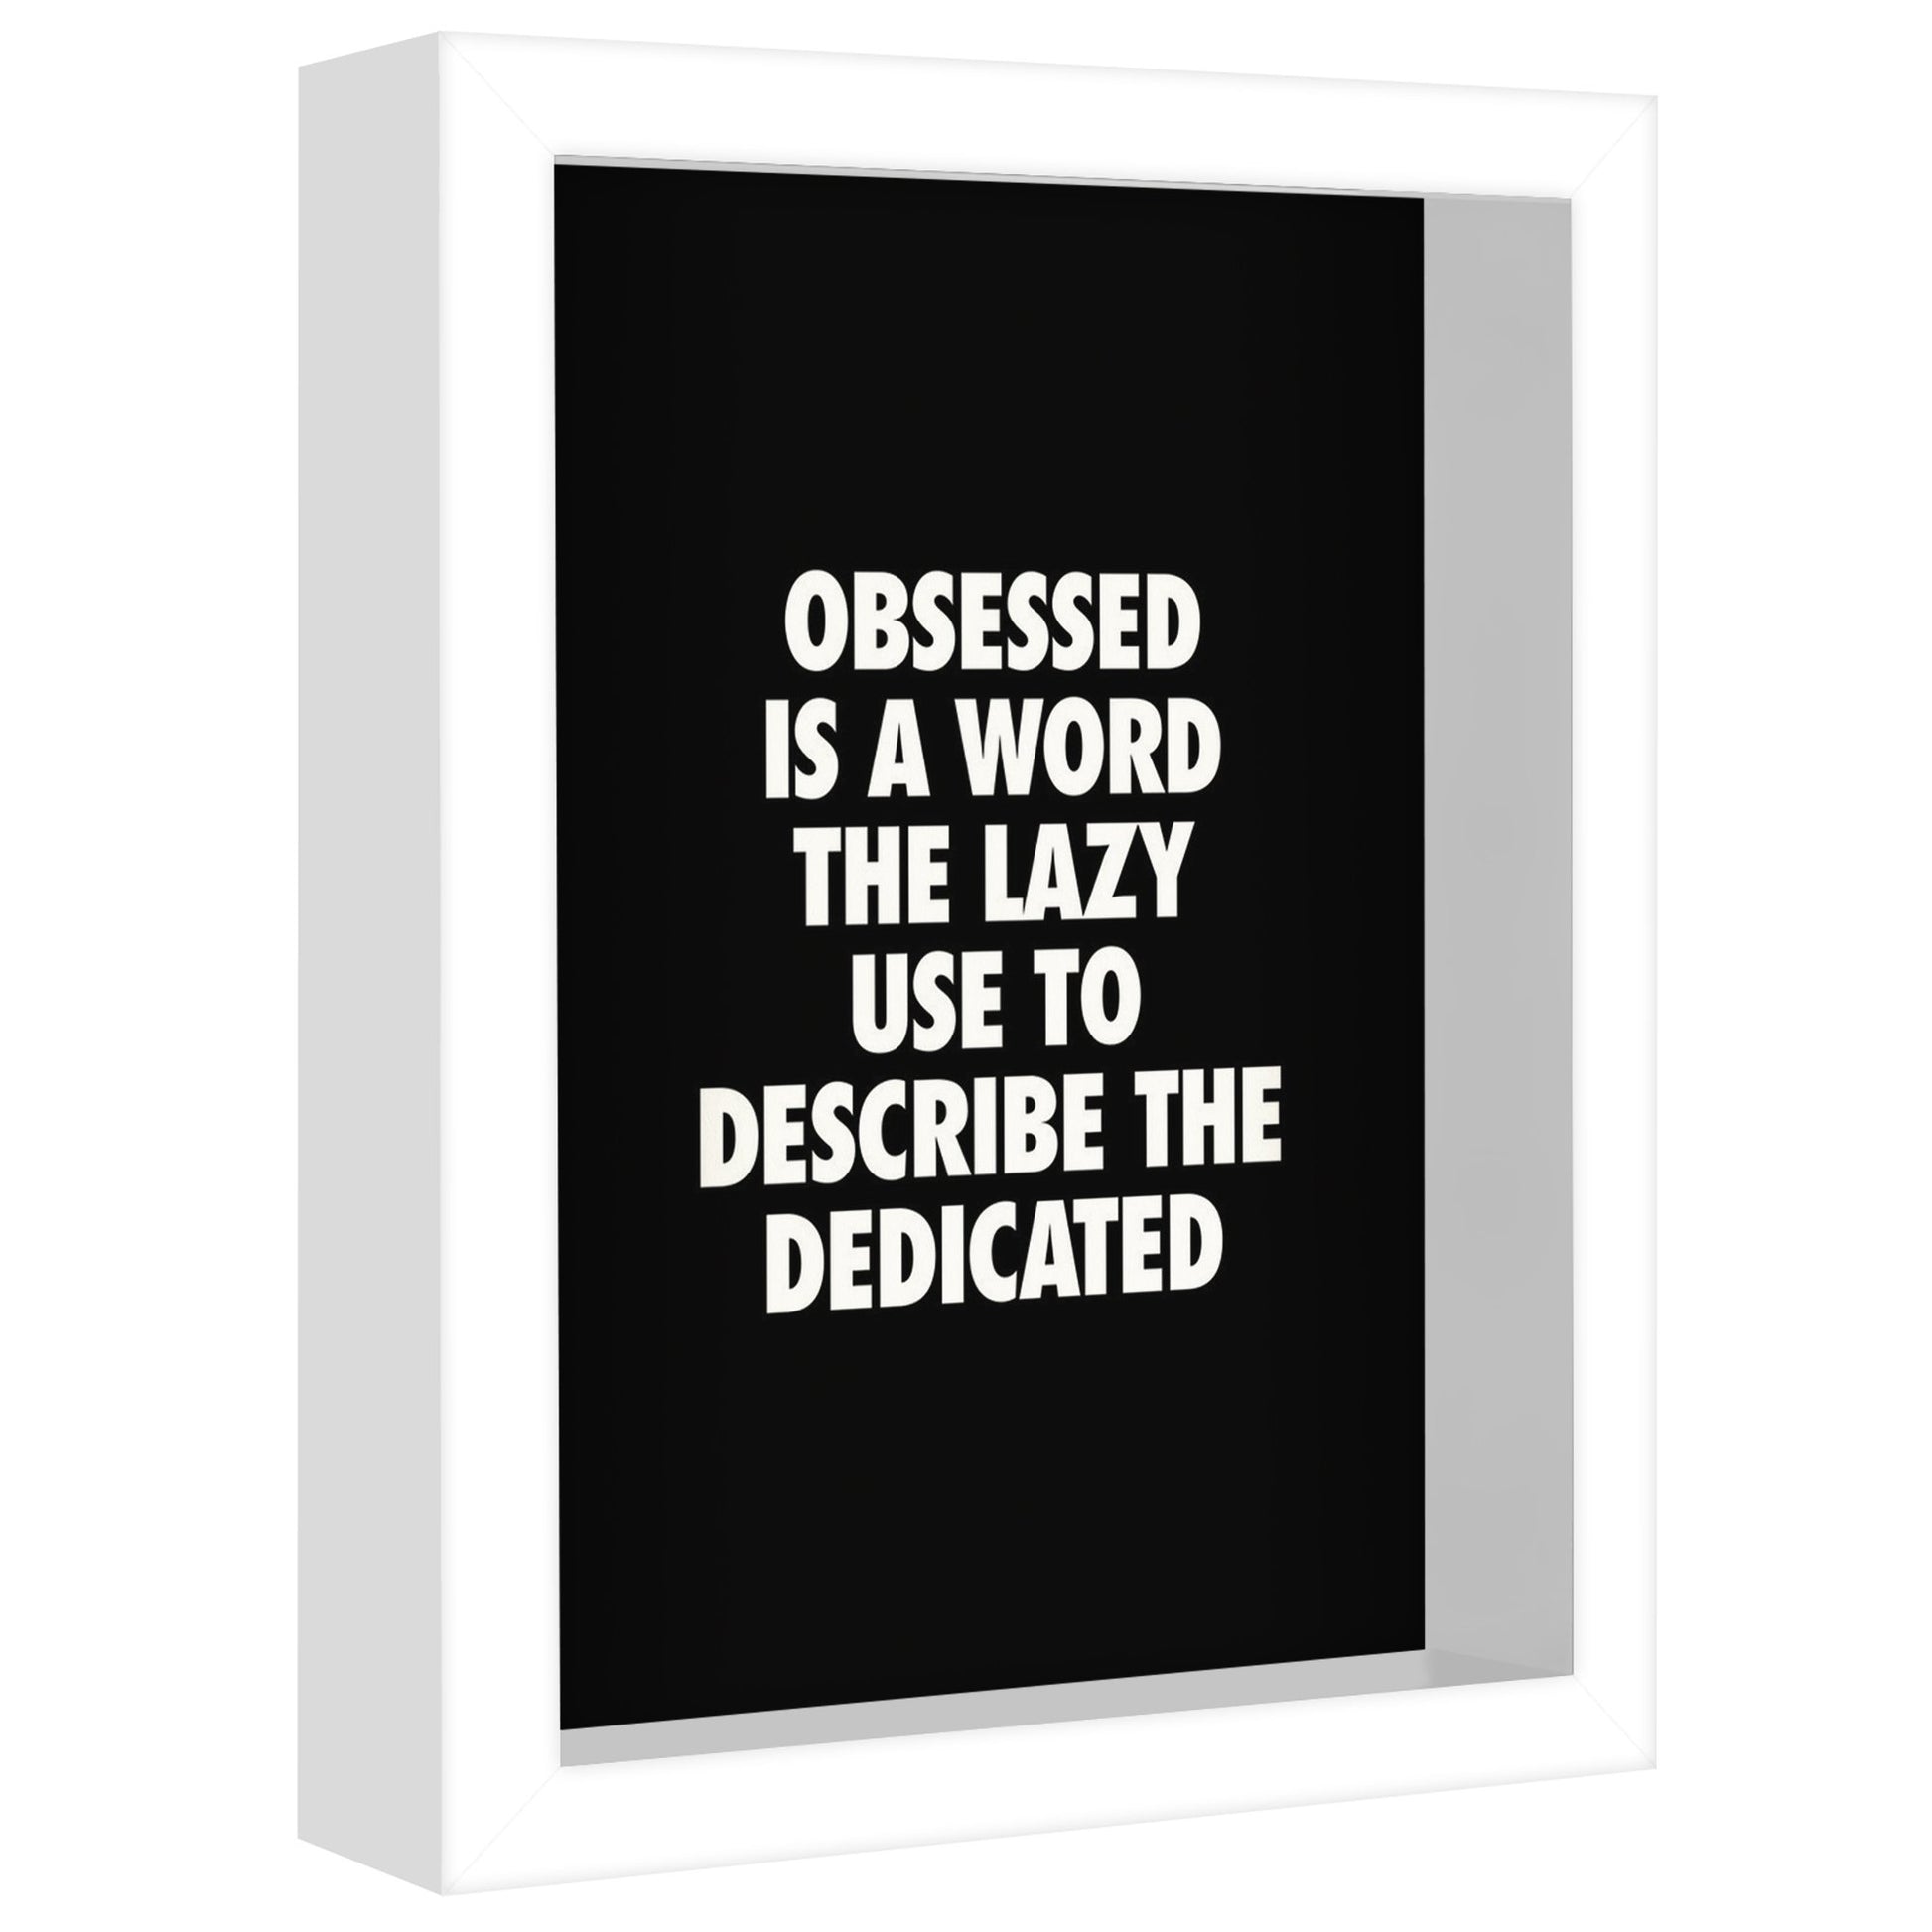 Obsessed Is A Word The Lazy Use By Motivated Type - Shadow Box Framed Art - Americanflat